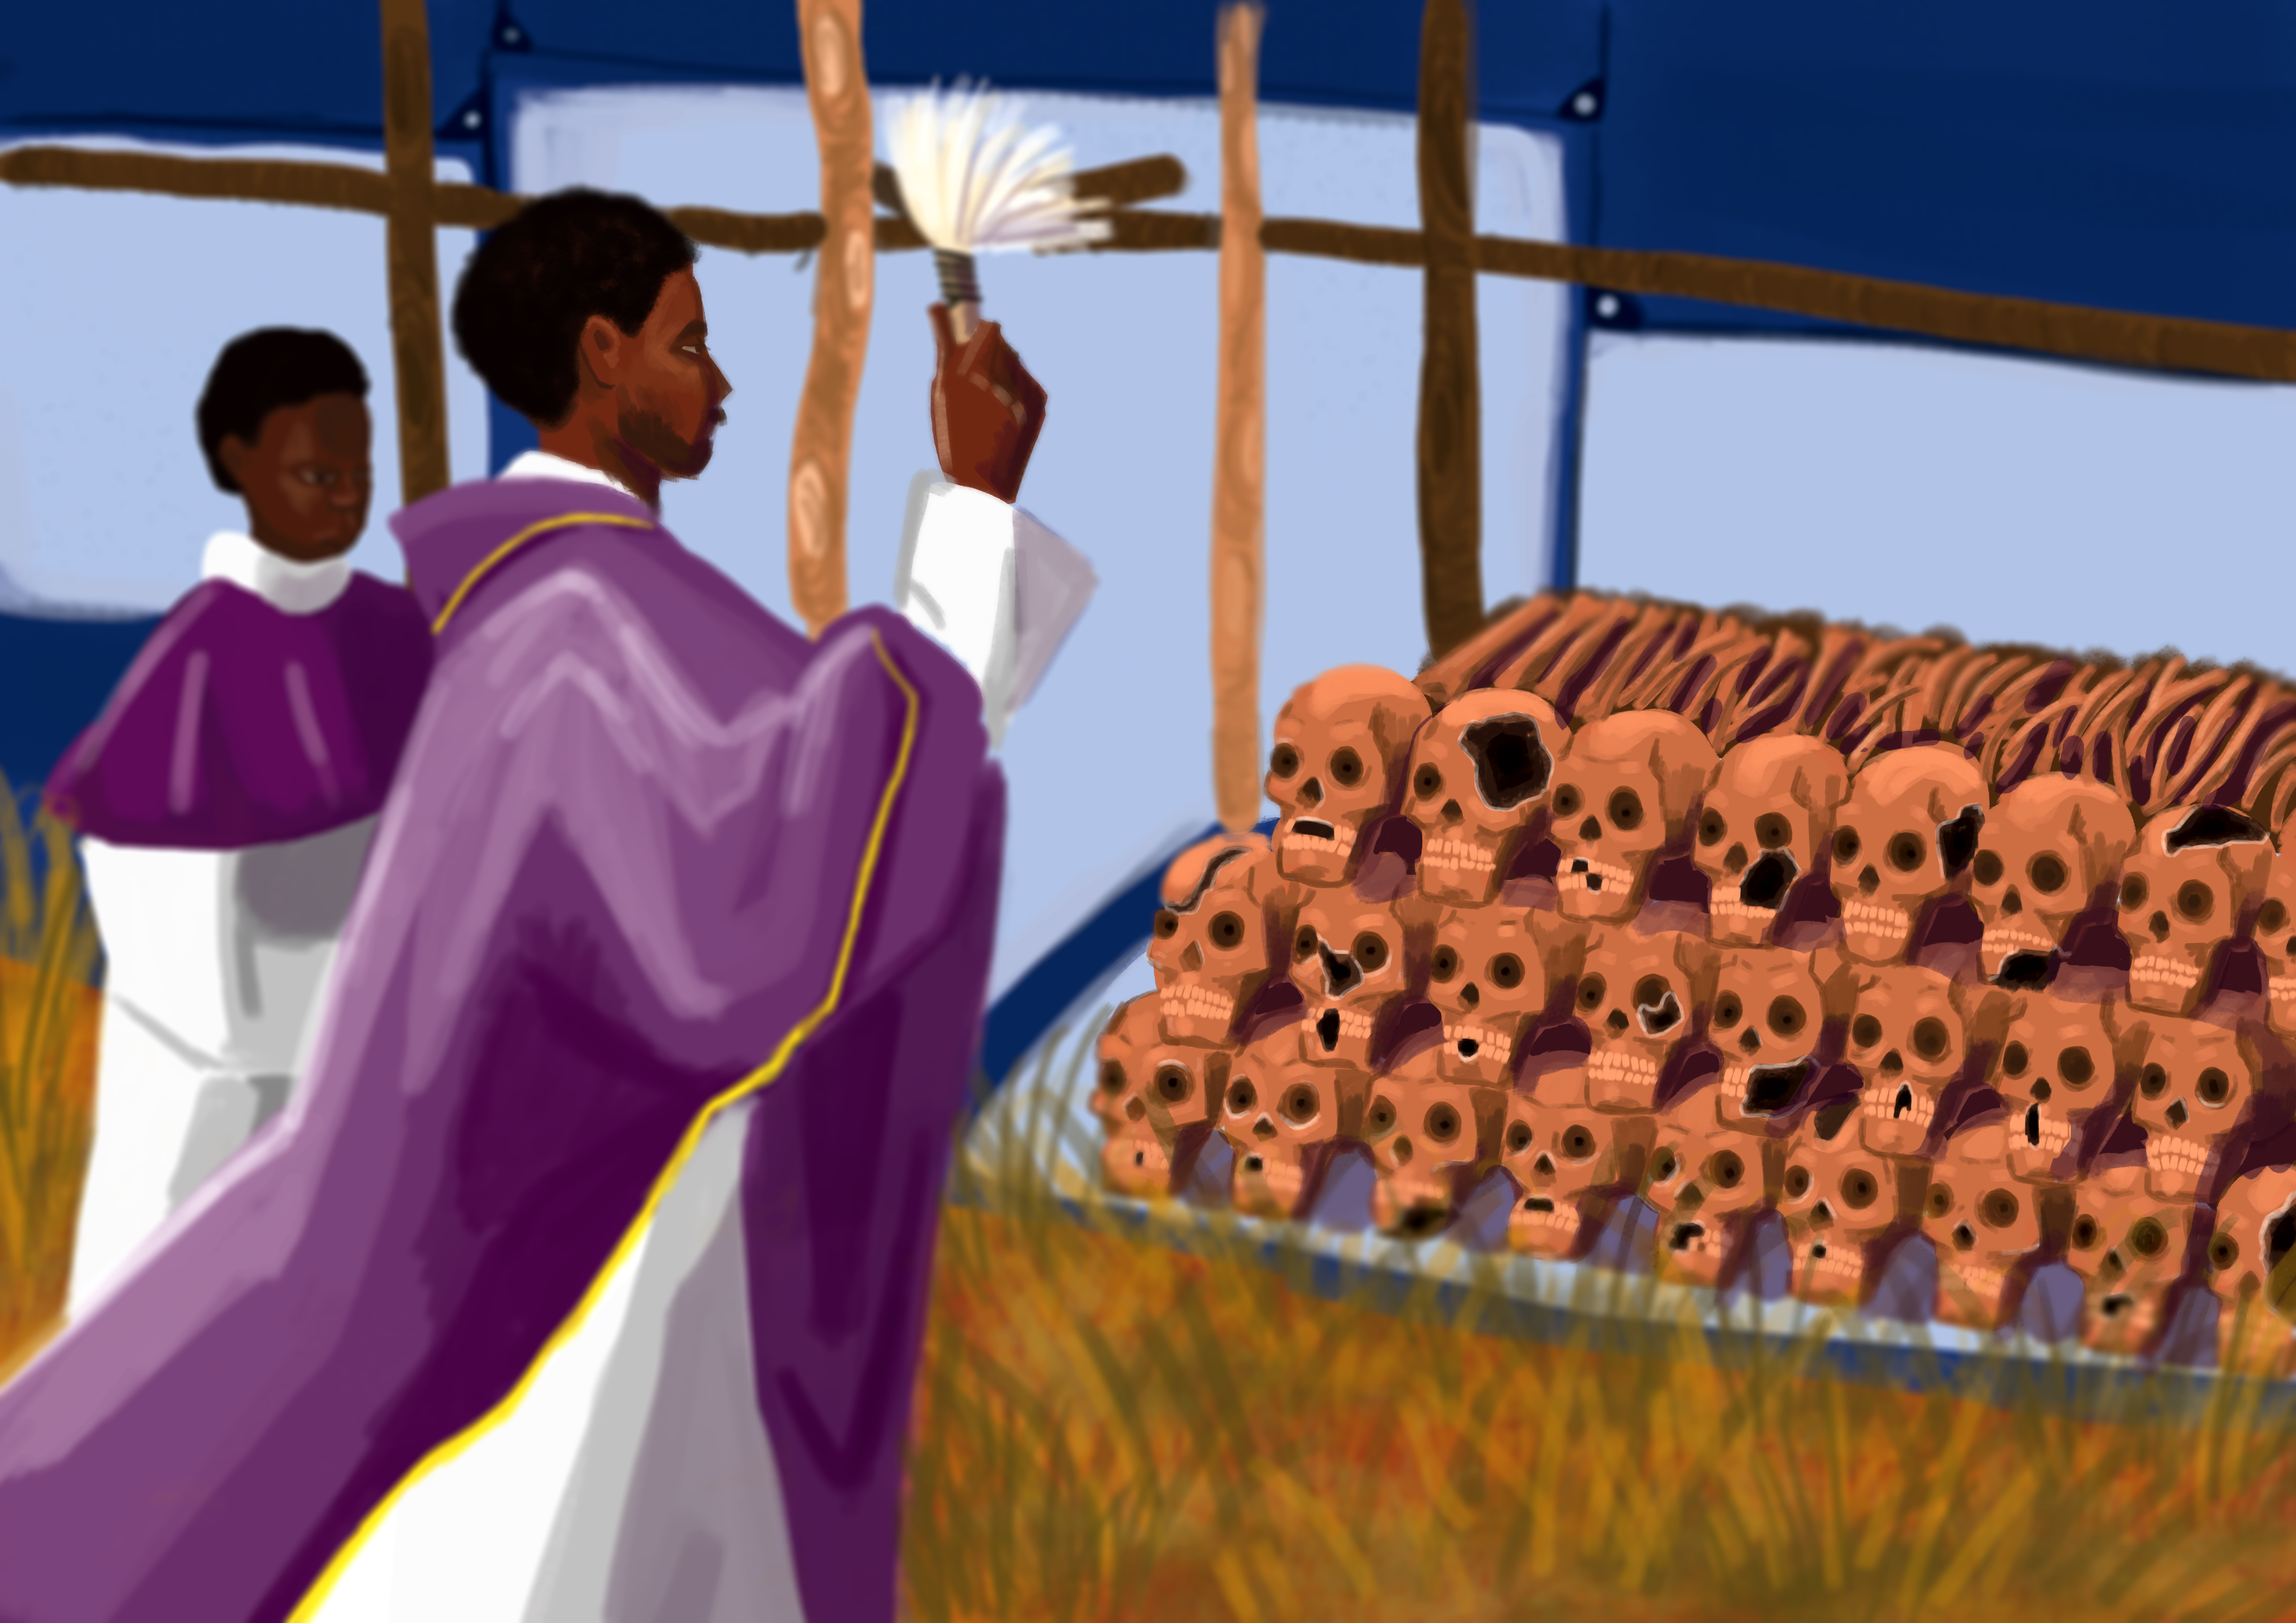 An illustration depicting a priest blessing the bones of the bodies excavated from mass graves in Burundi